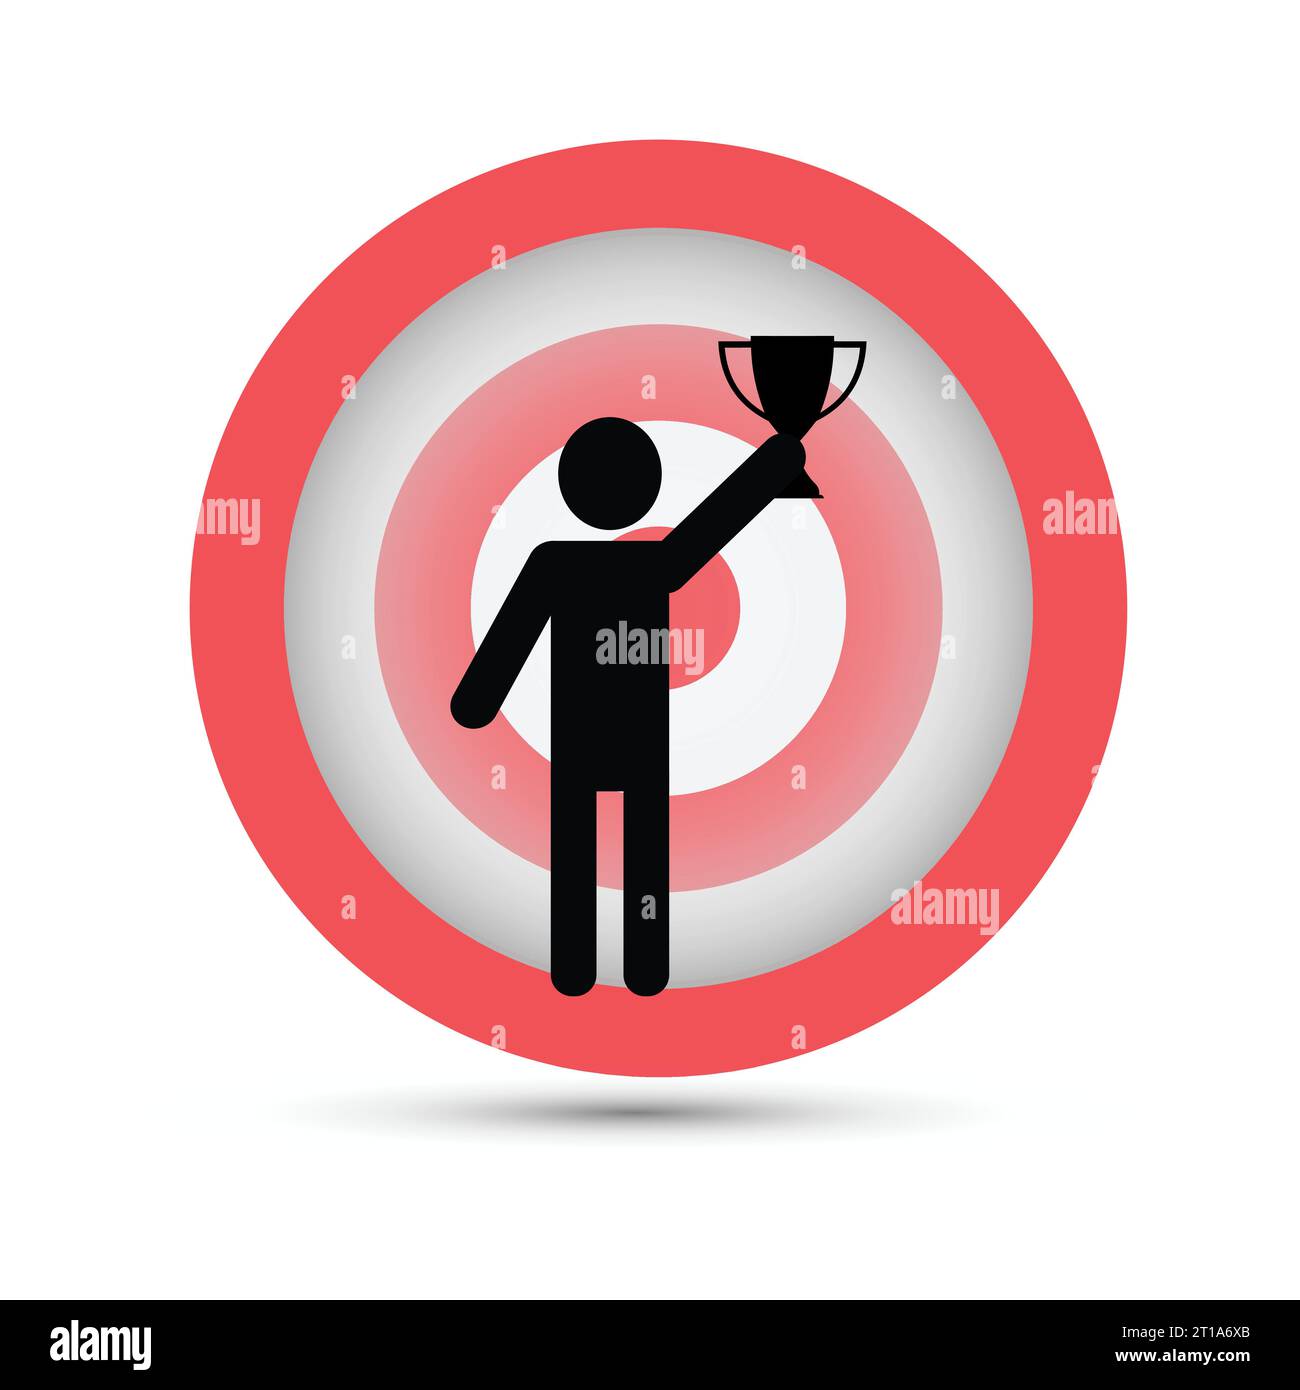 Silhouette of a man holding a trophy on a target Stock Vector